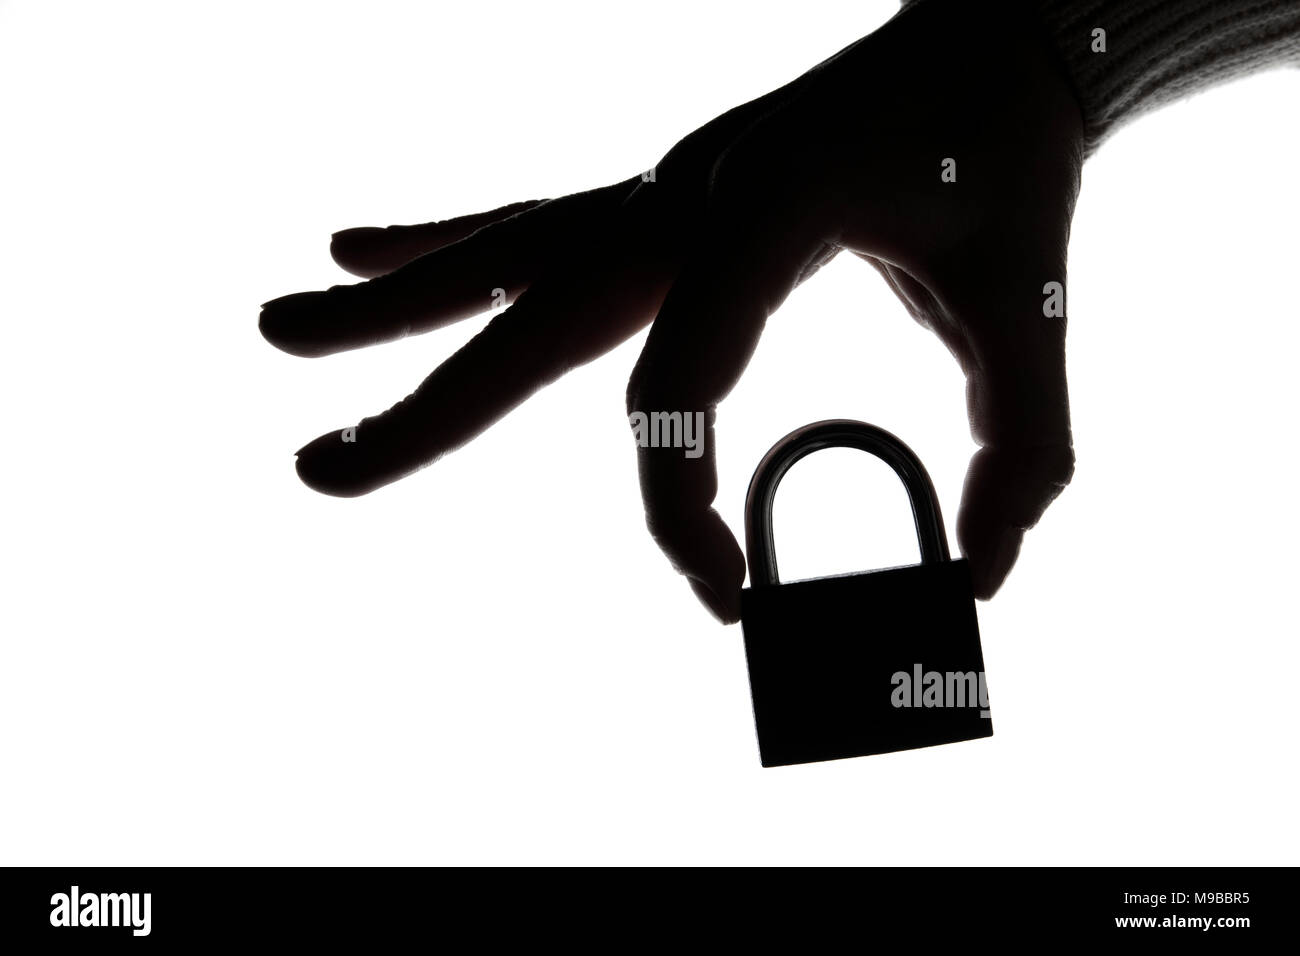 Silhouette of a hand holding a padlock on a plain white background. Security and privacy. Stock Photo